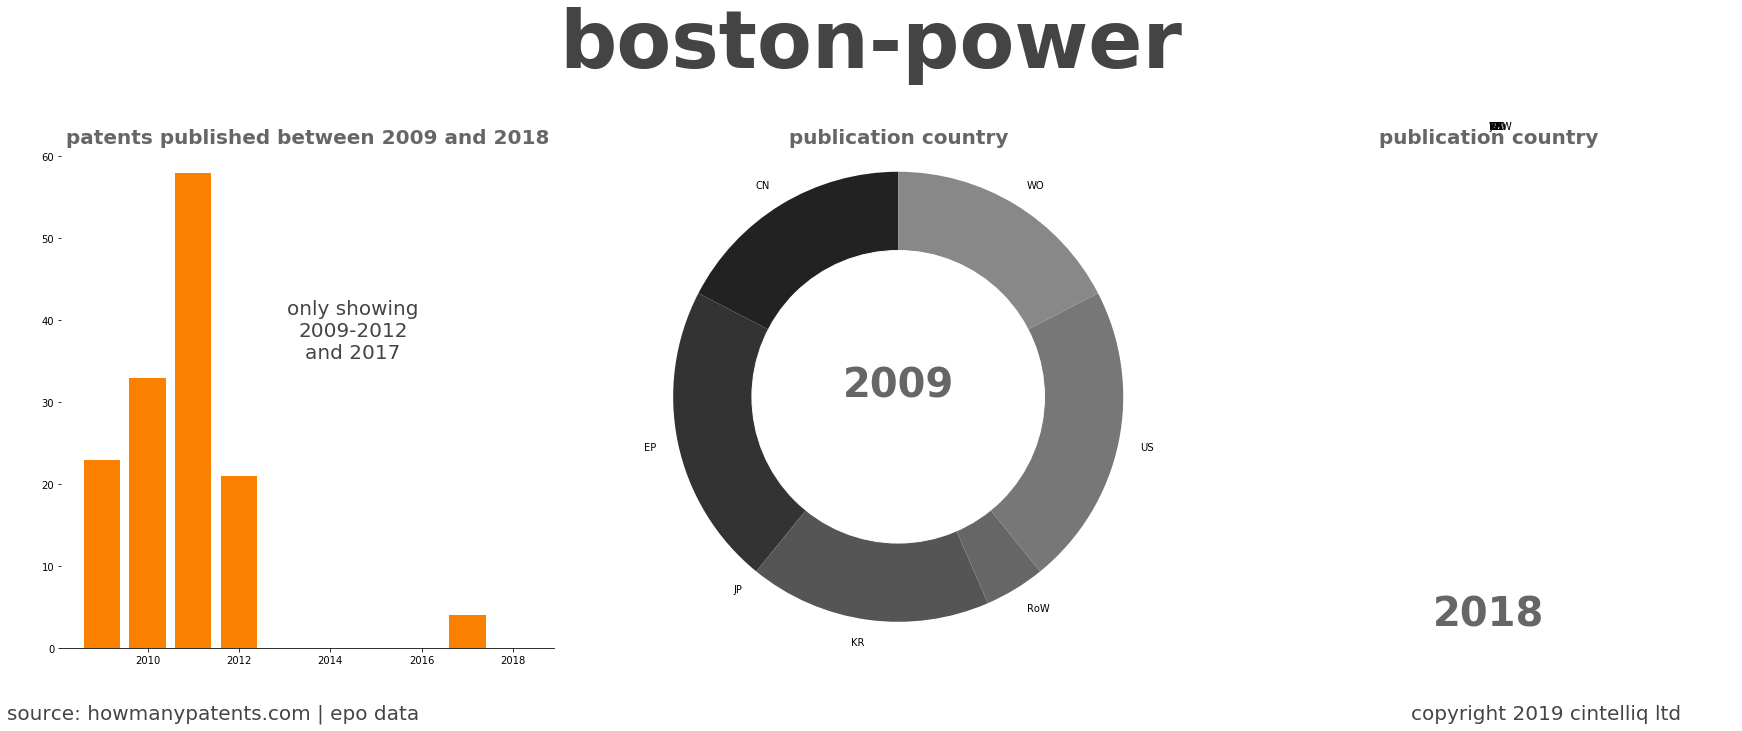 summary of patents for Boston-Power